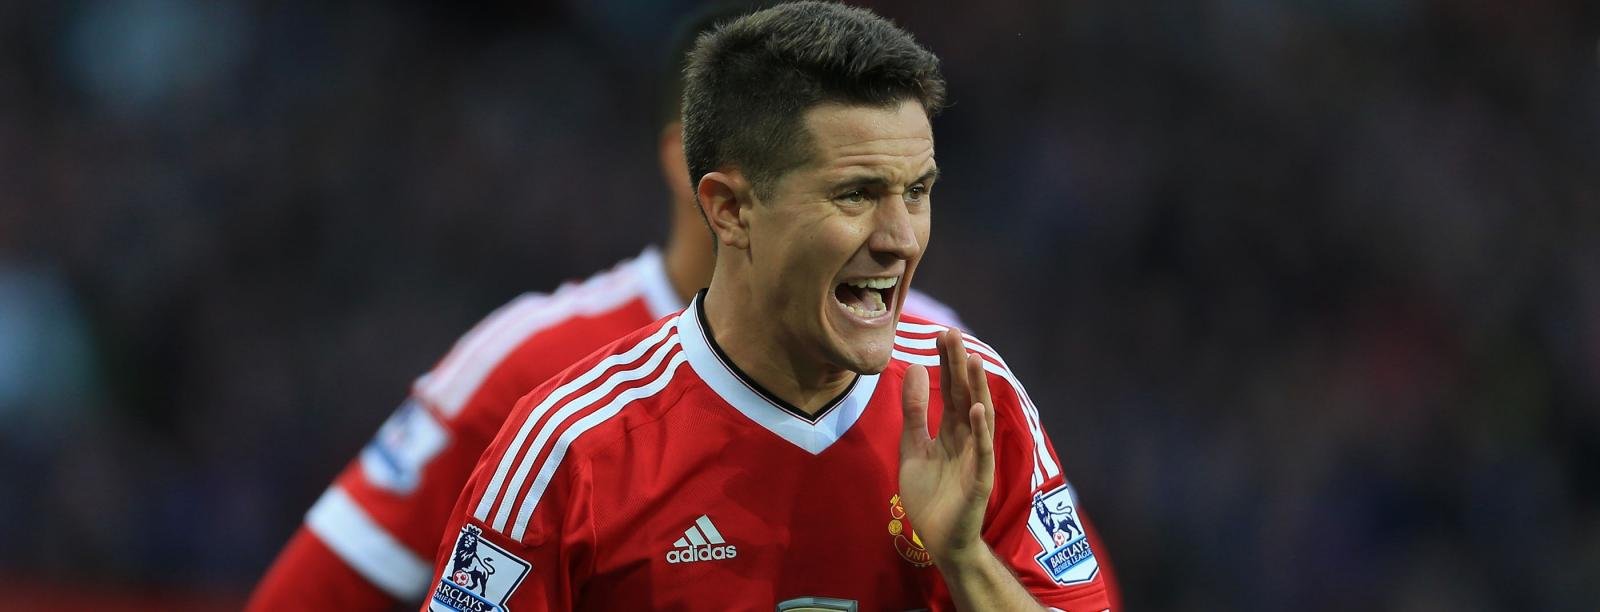 Ander Herrera is key to United and Manchester derby success